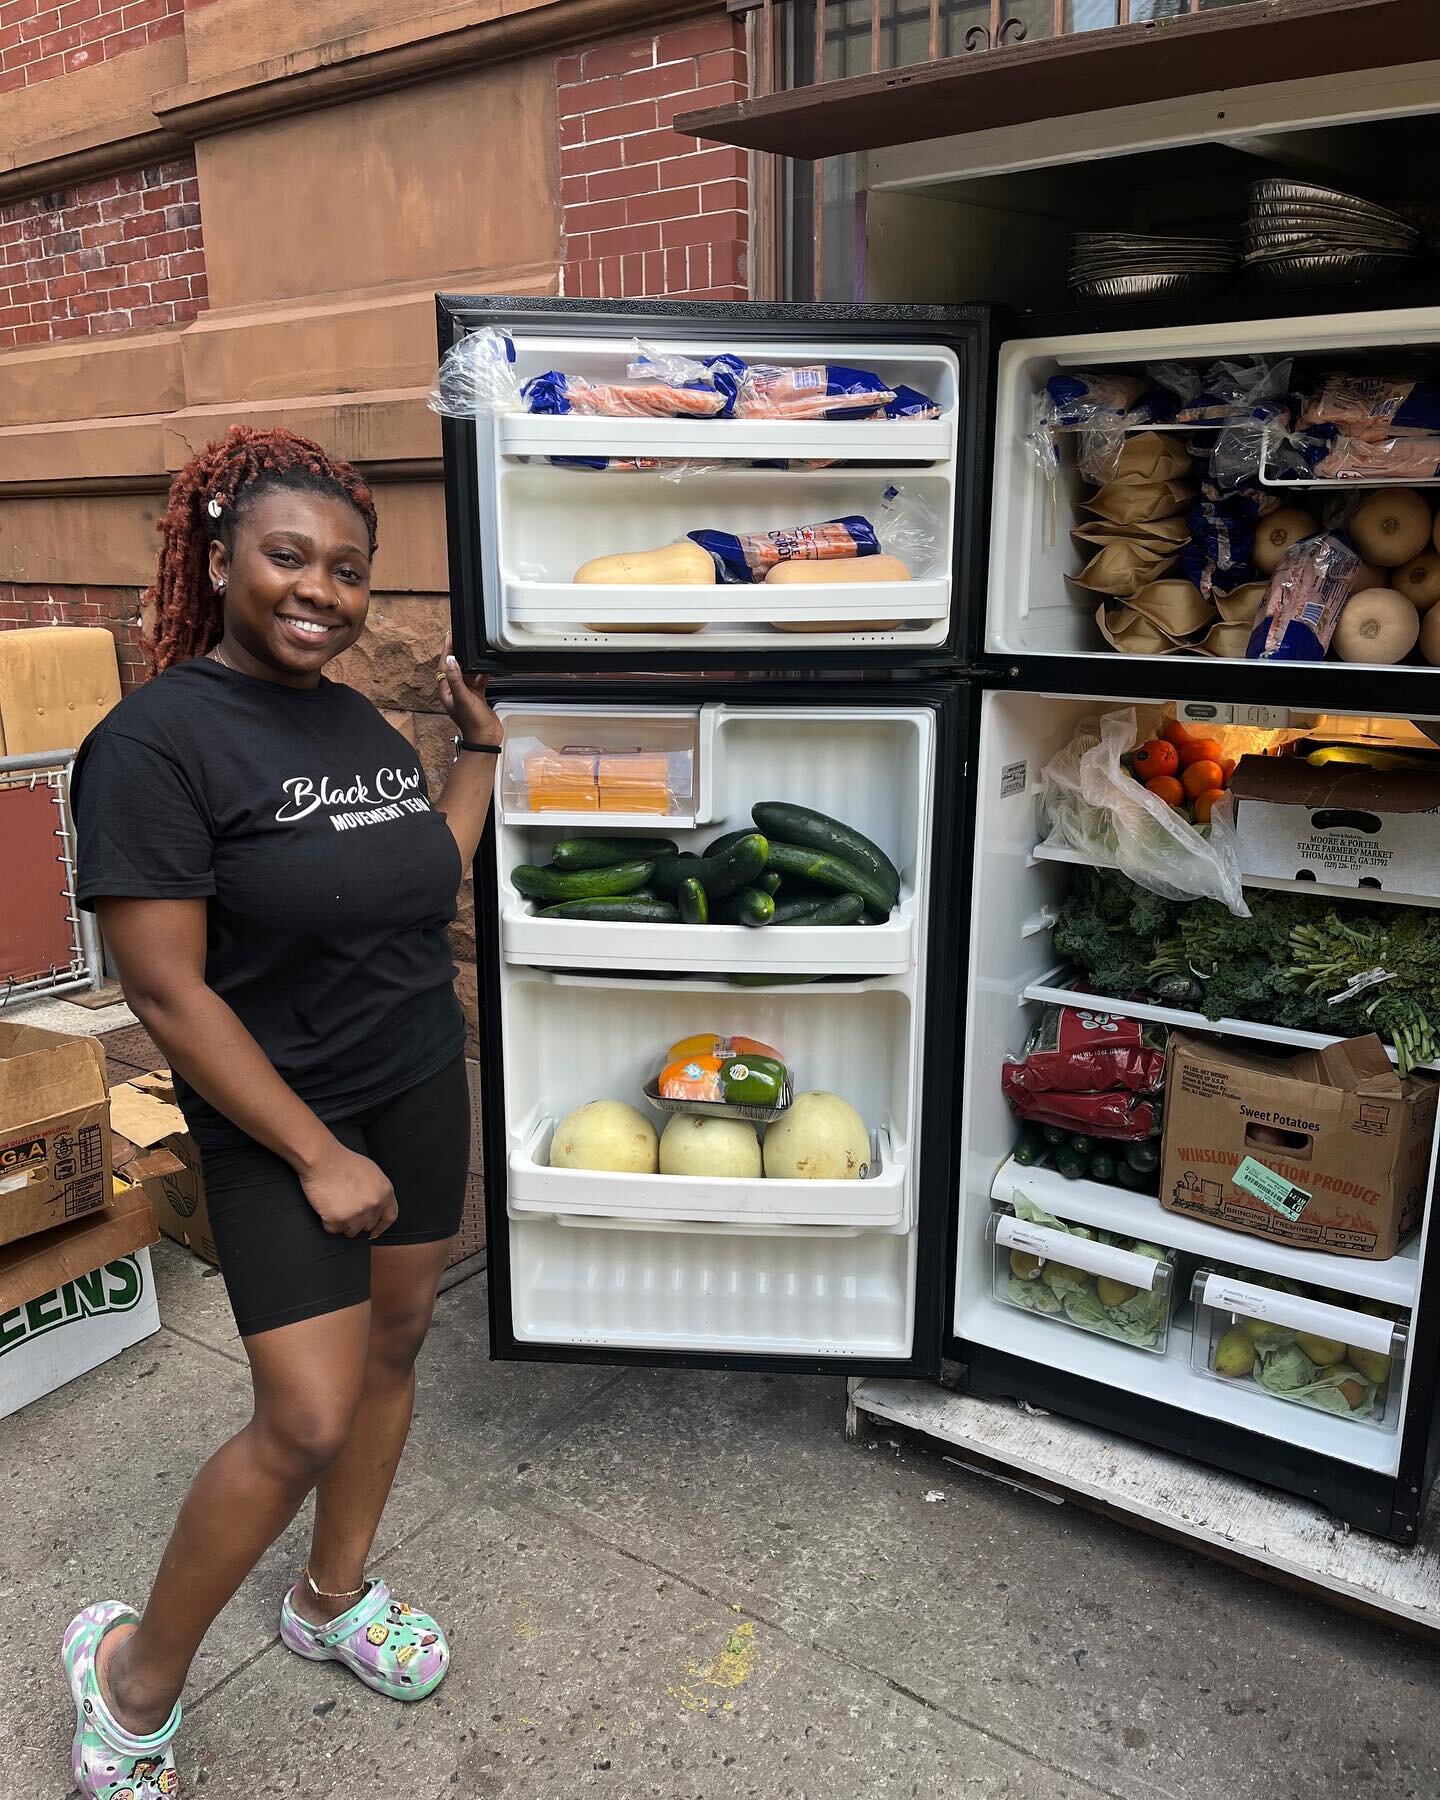 Swipe for Magic 🪄

We&rsquo;re Filling Fridges Again 🙌🏾🙌🏾 &hellip; this month we&rsquo;re hitting up fridges in #Harlem. 

To donate please click the donation link in our bio. 

Thanks again to our program partners &amp; sponsors @worldcentric @